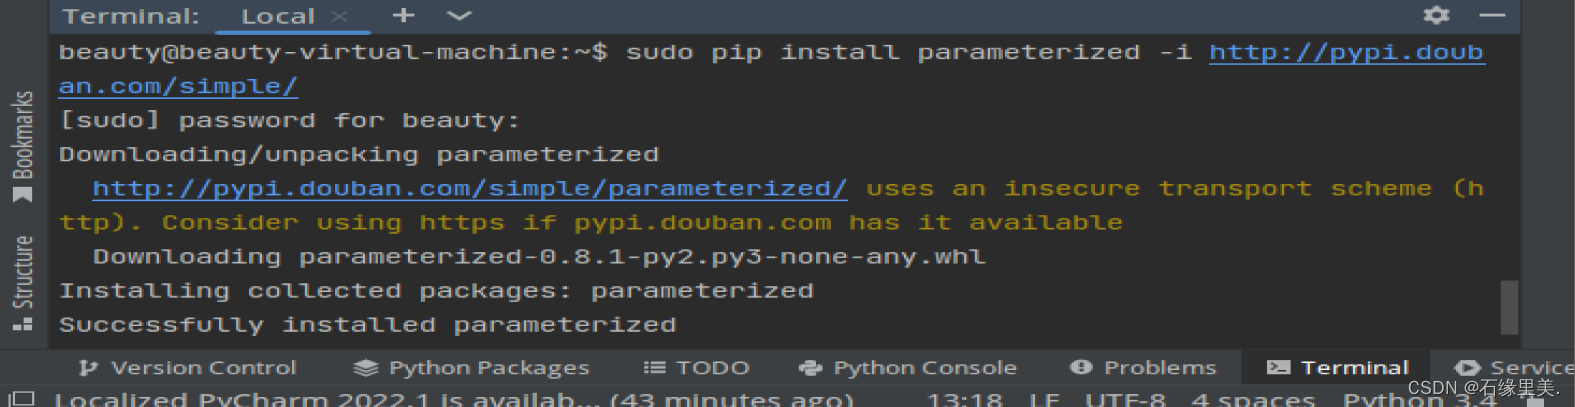 pip install parameterized时出现错误 Cannot fetch index base URL https://pypi